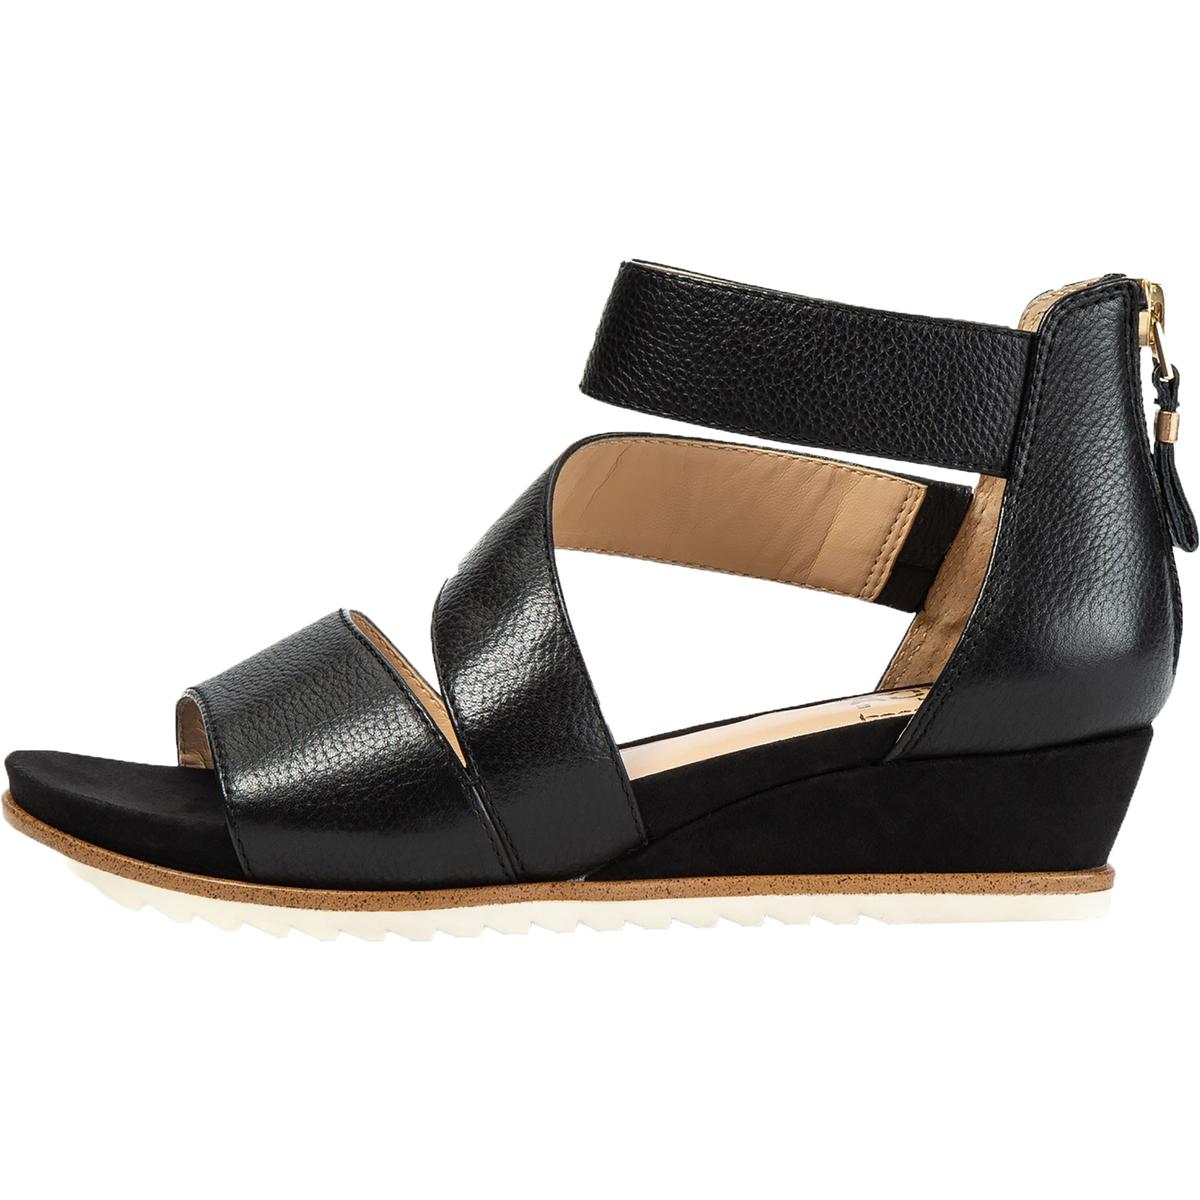 Lucca Lane Womens Fifi Leather Ankle Strap Wedge Sandals Shoes BHFO 1764